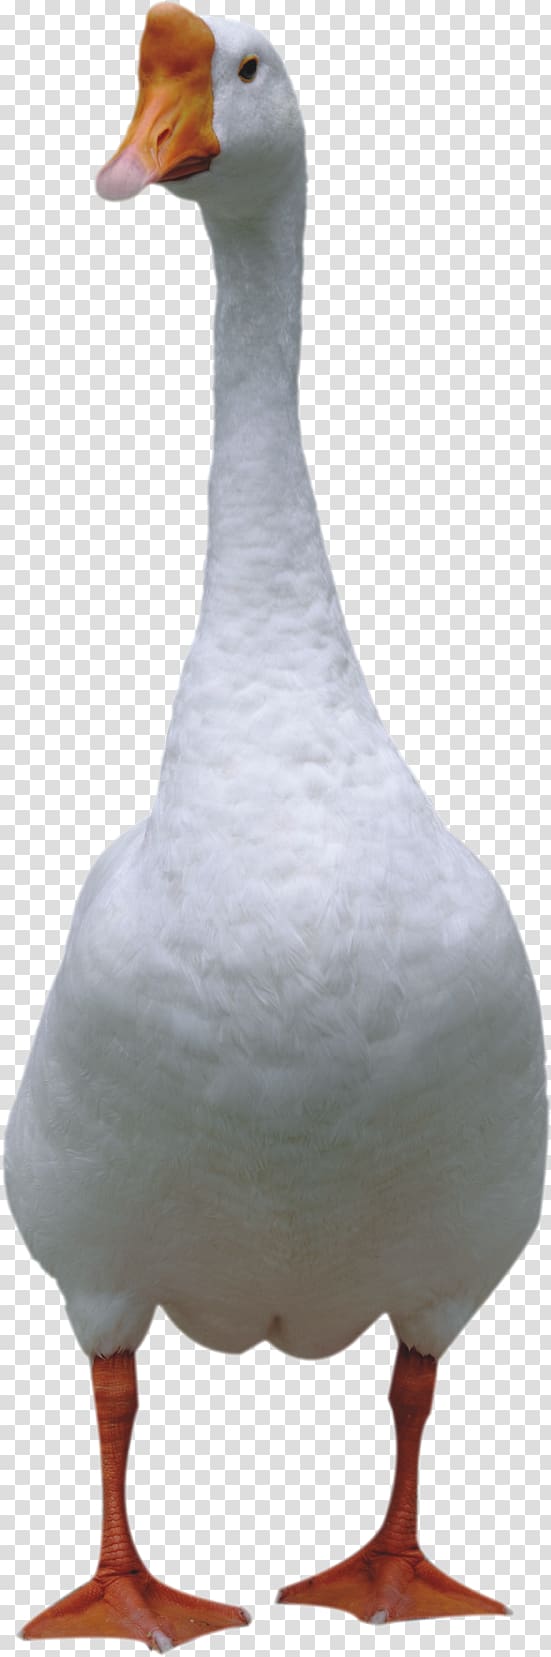 Duck Domestic goose Bird Cygnini, Goose transparent background PNG clipart